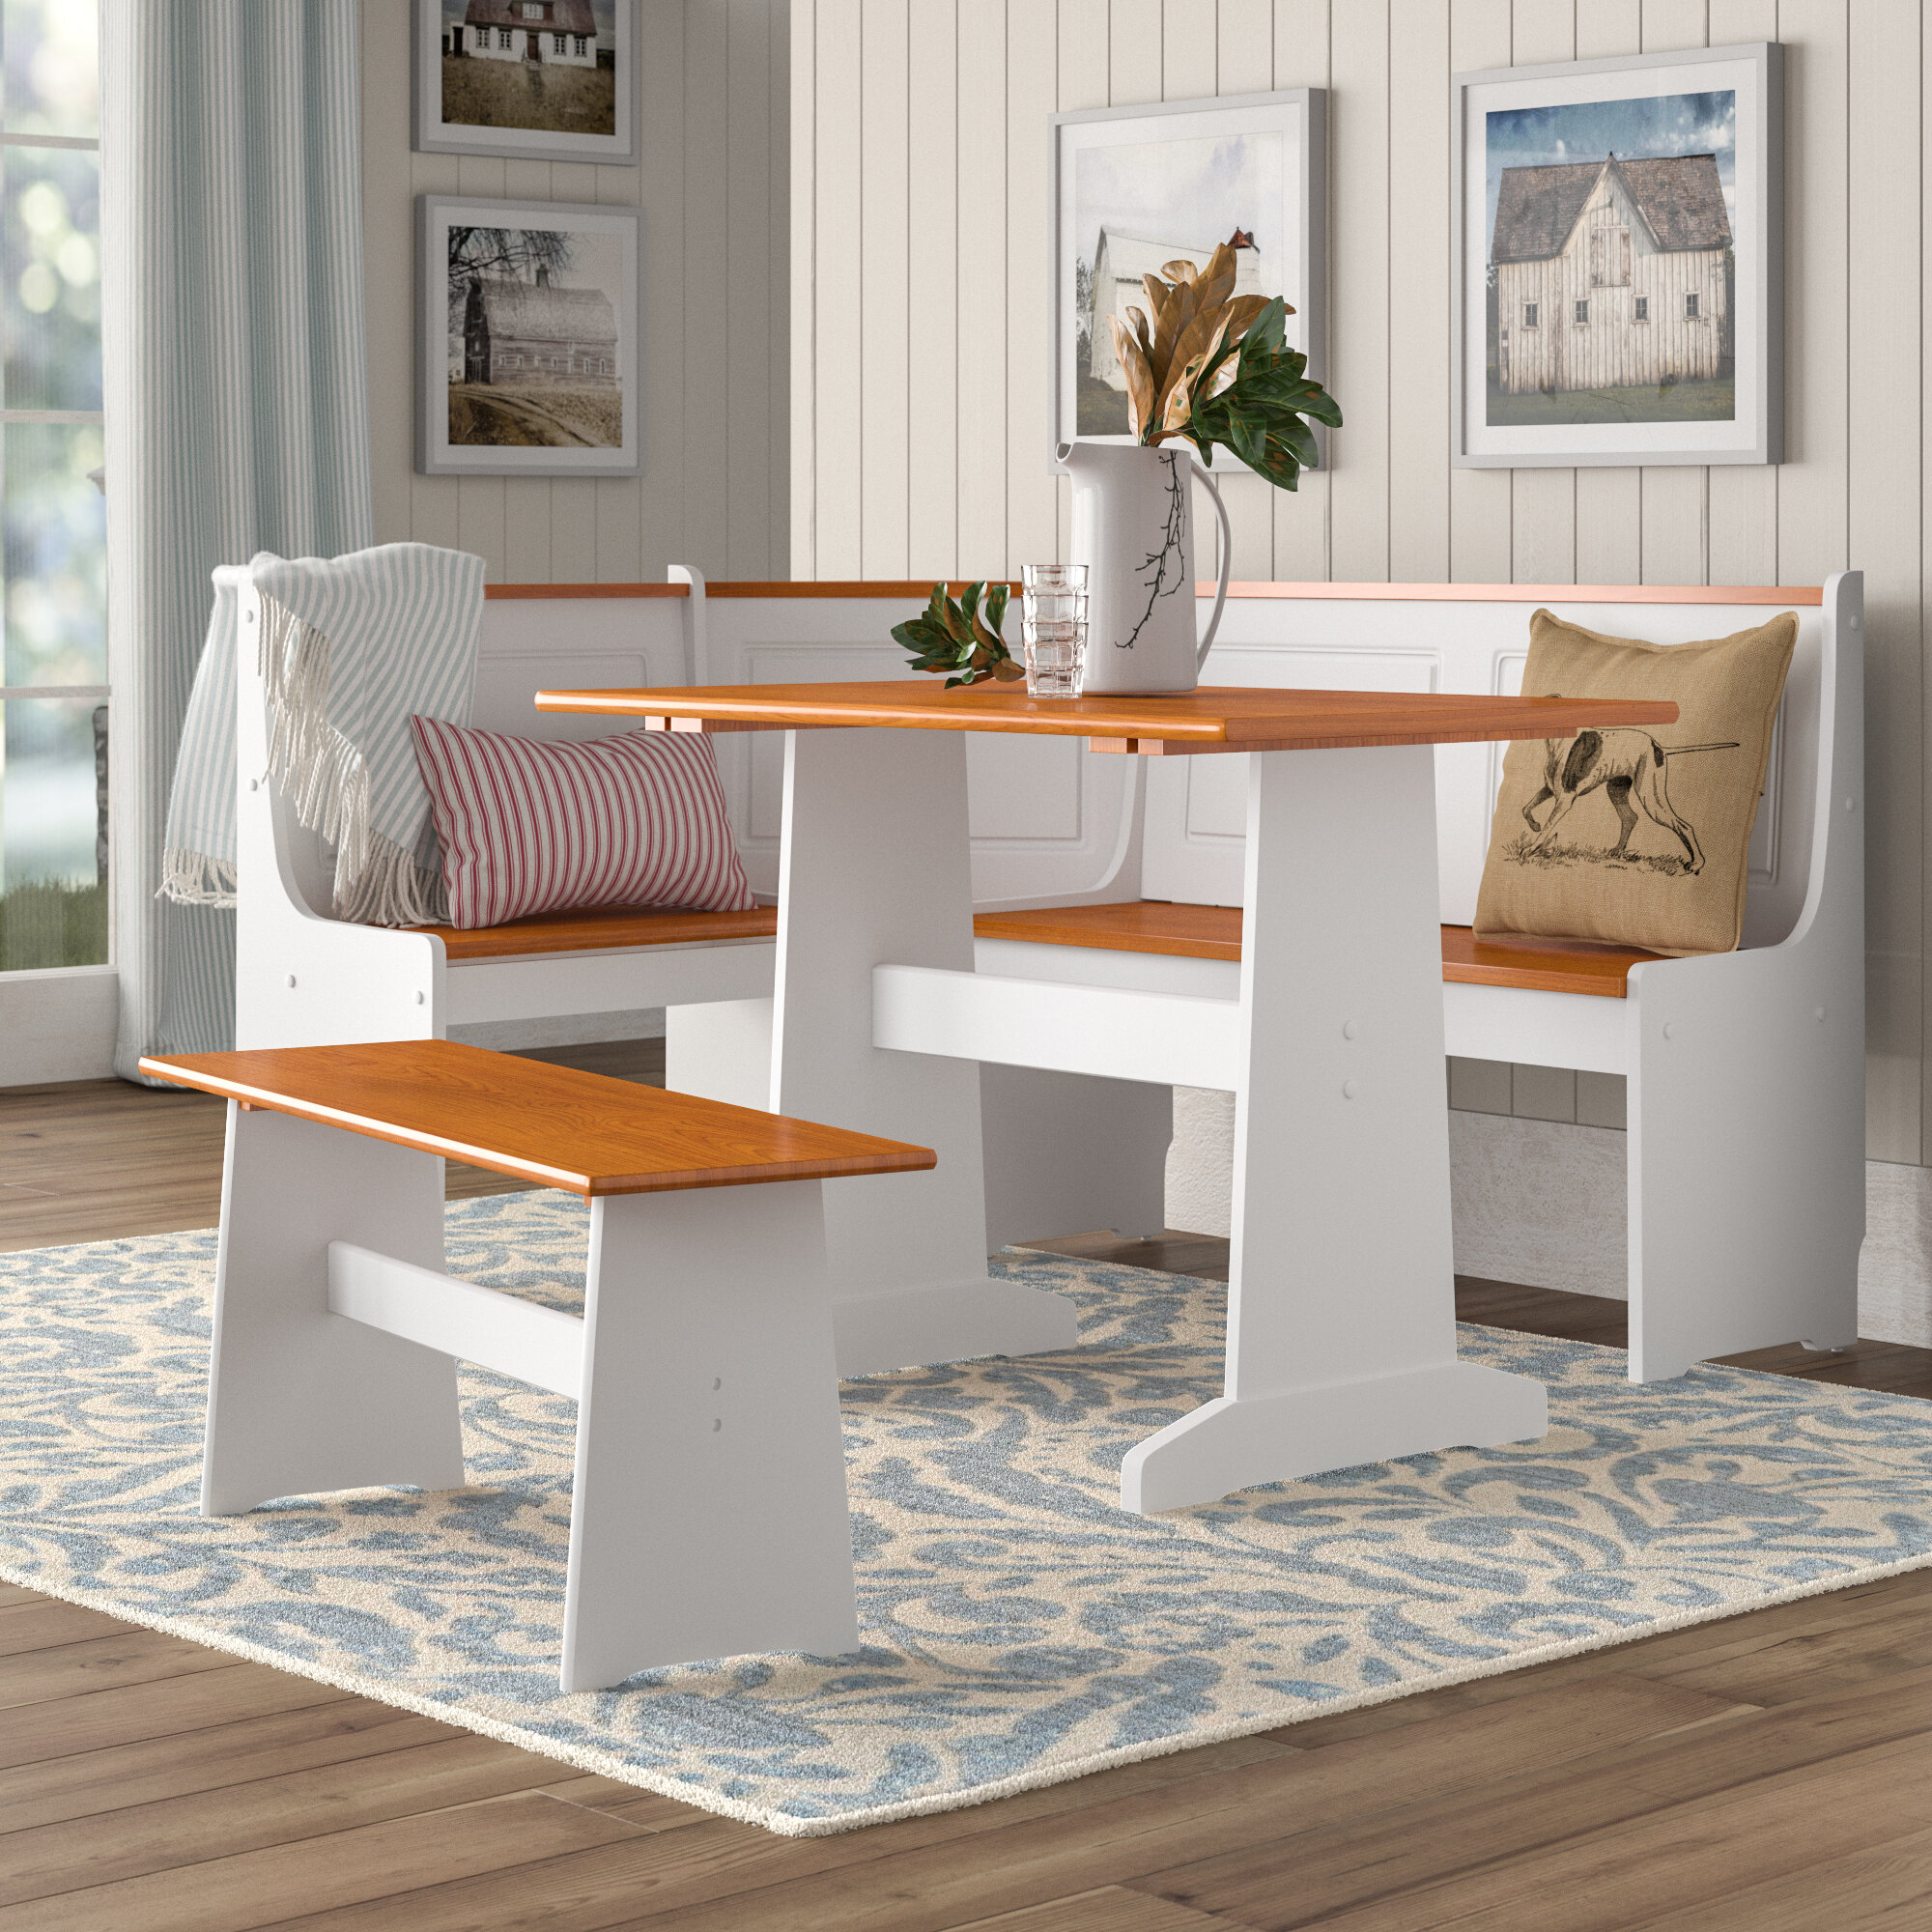 Farmhouse Dining Room Table Wood Kitchen Breakfast Tables 6-Person Rectangular 